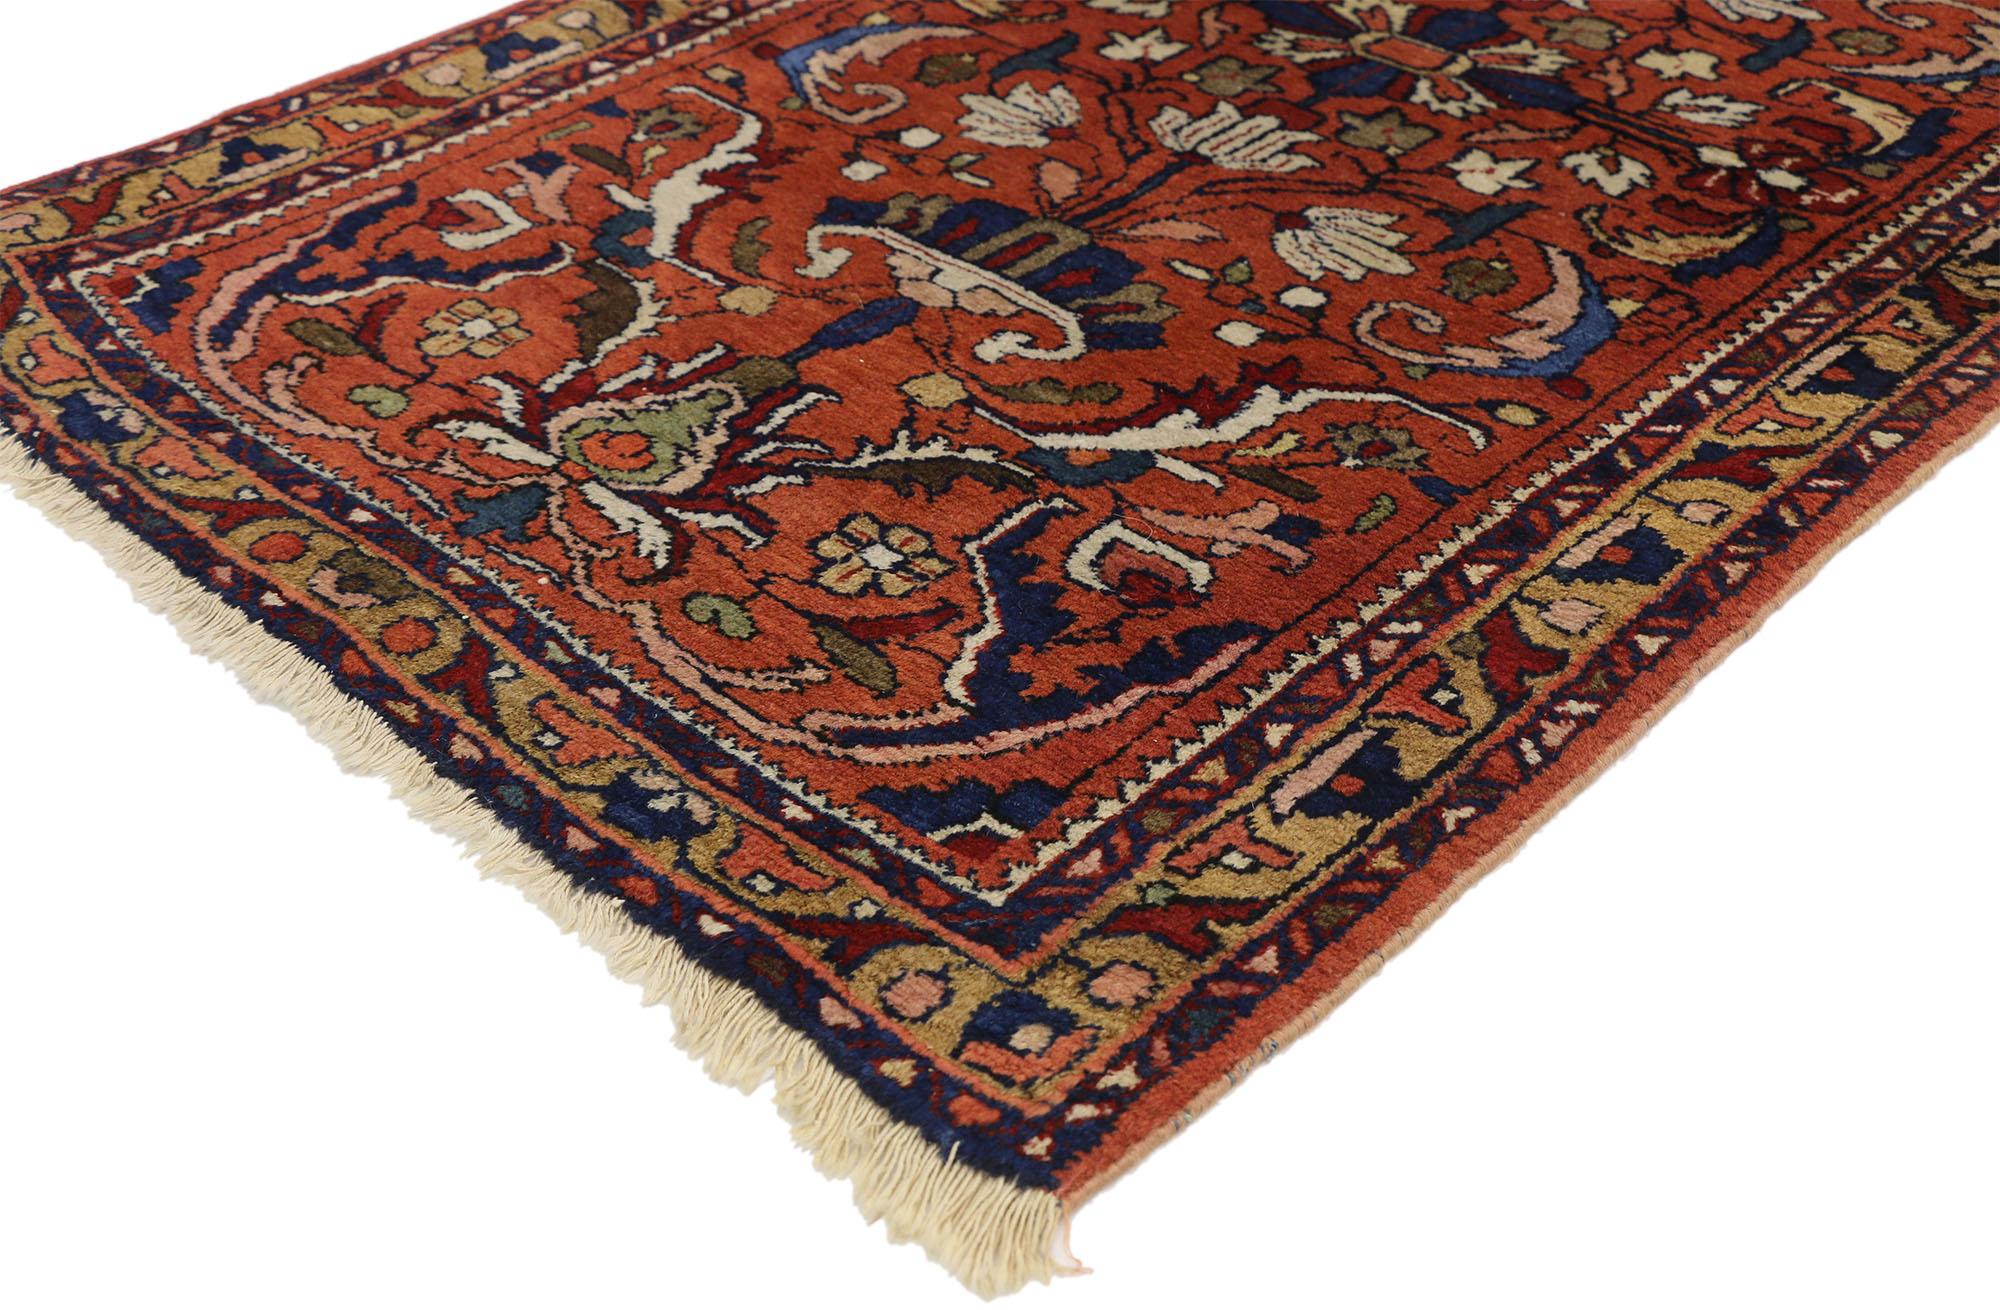 77071, antique Persian Lilihan Accent rug with Traditional style. This hand knotted wool antique Persian Lilihan rug features a double vase design spread across the rustic brick red field. The intricate vases sprout from lush palmettes, holding